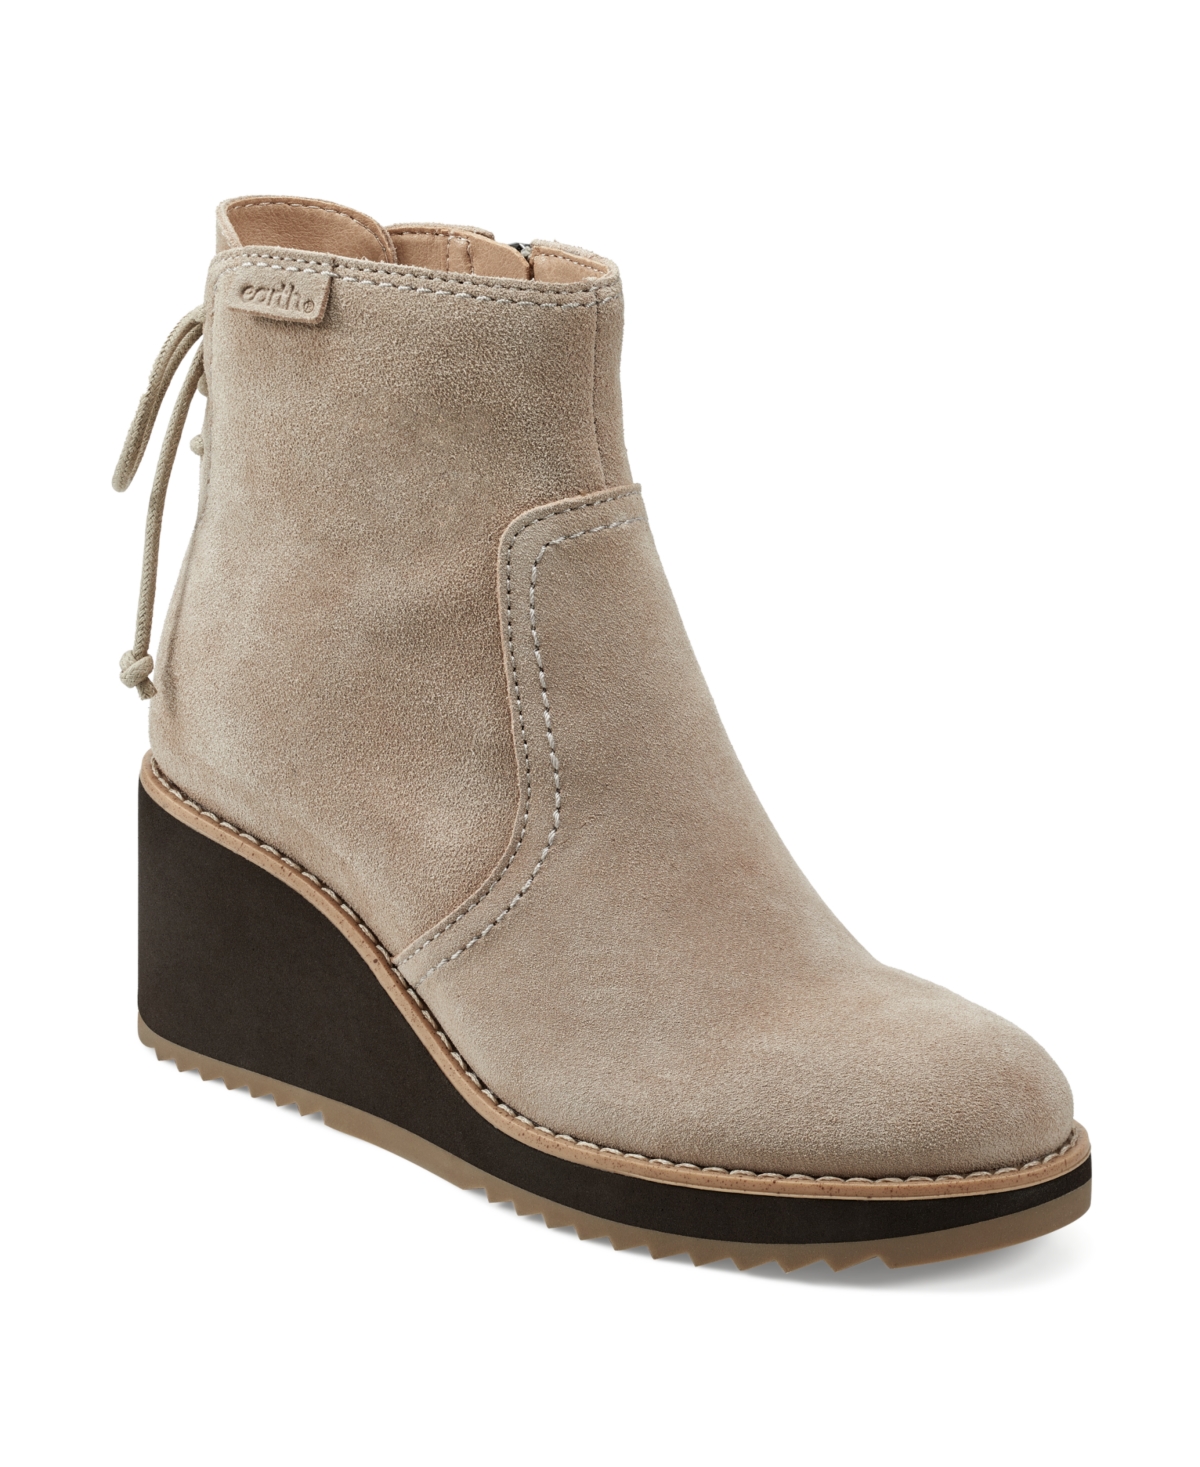 Earth Women's Calia Round Toe Casual Wedge Ankle Booties - Taupe Suede